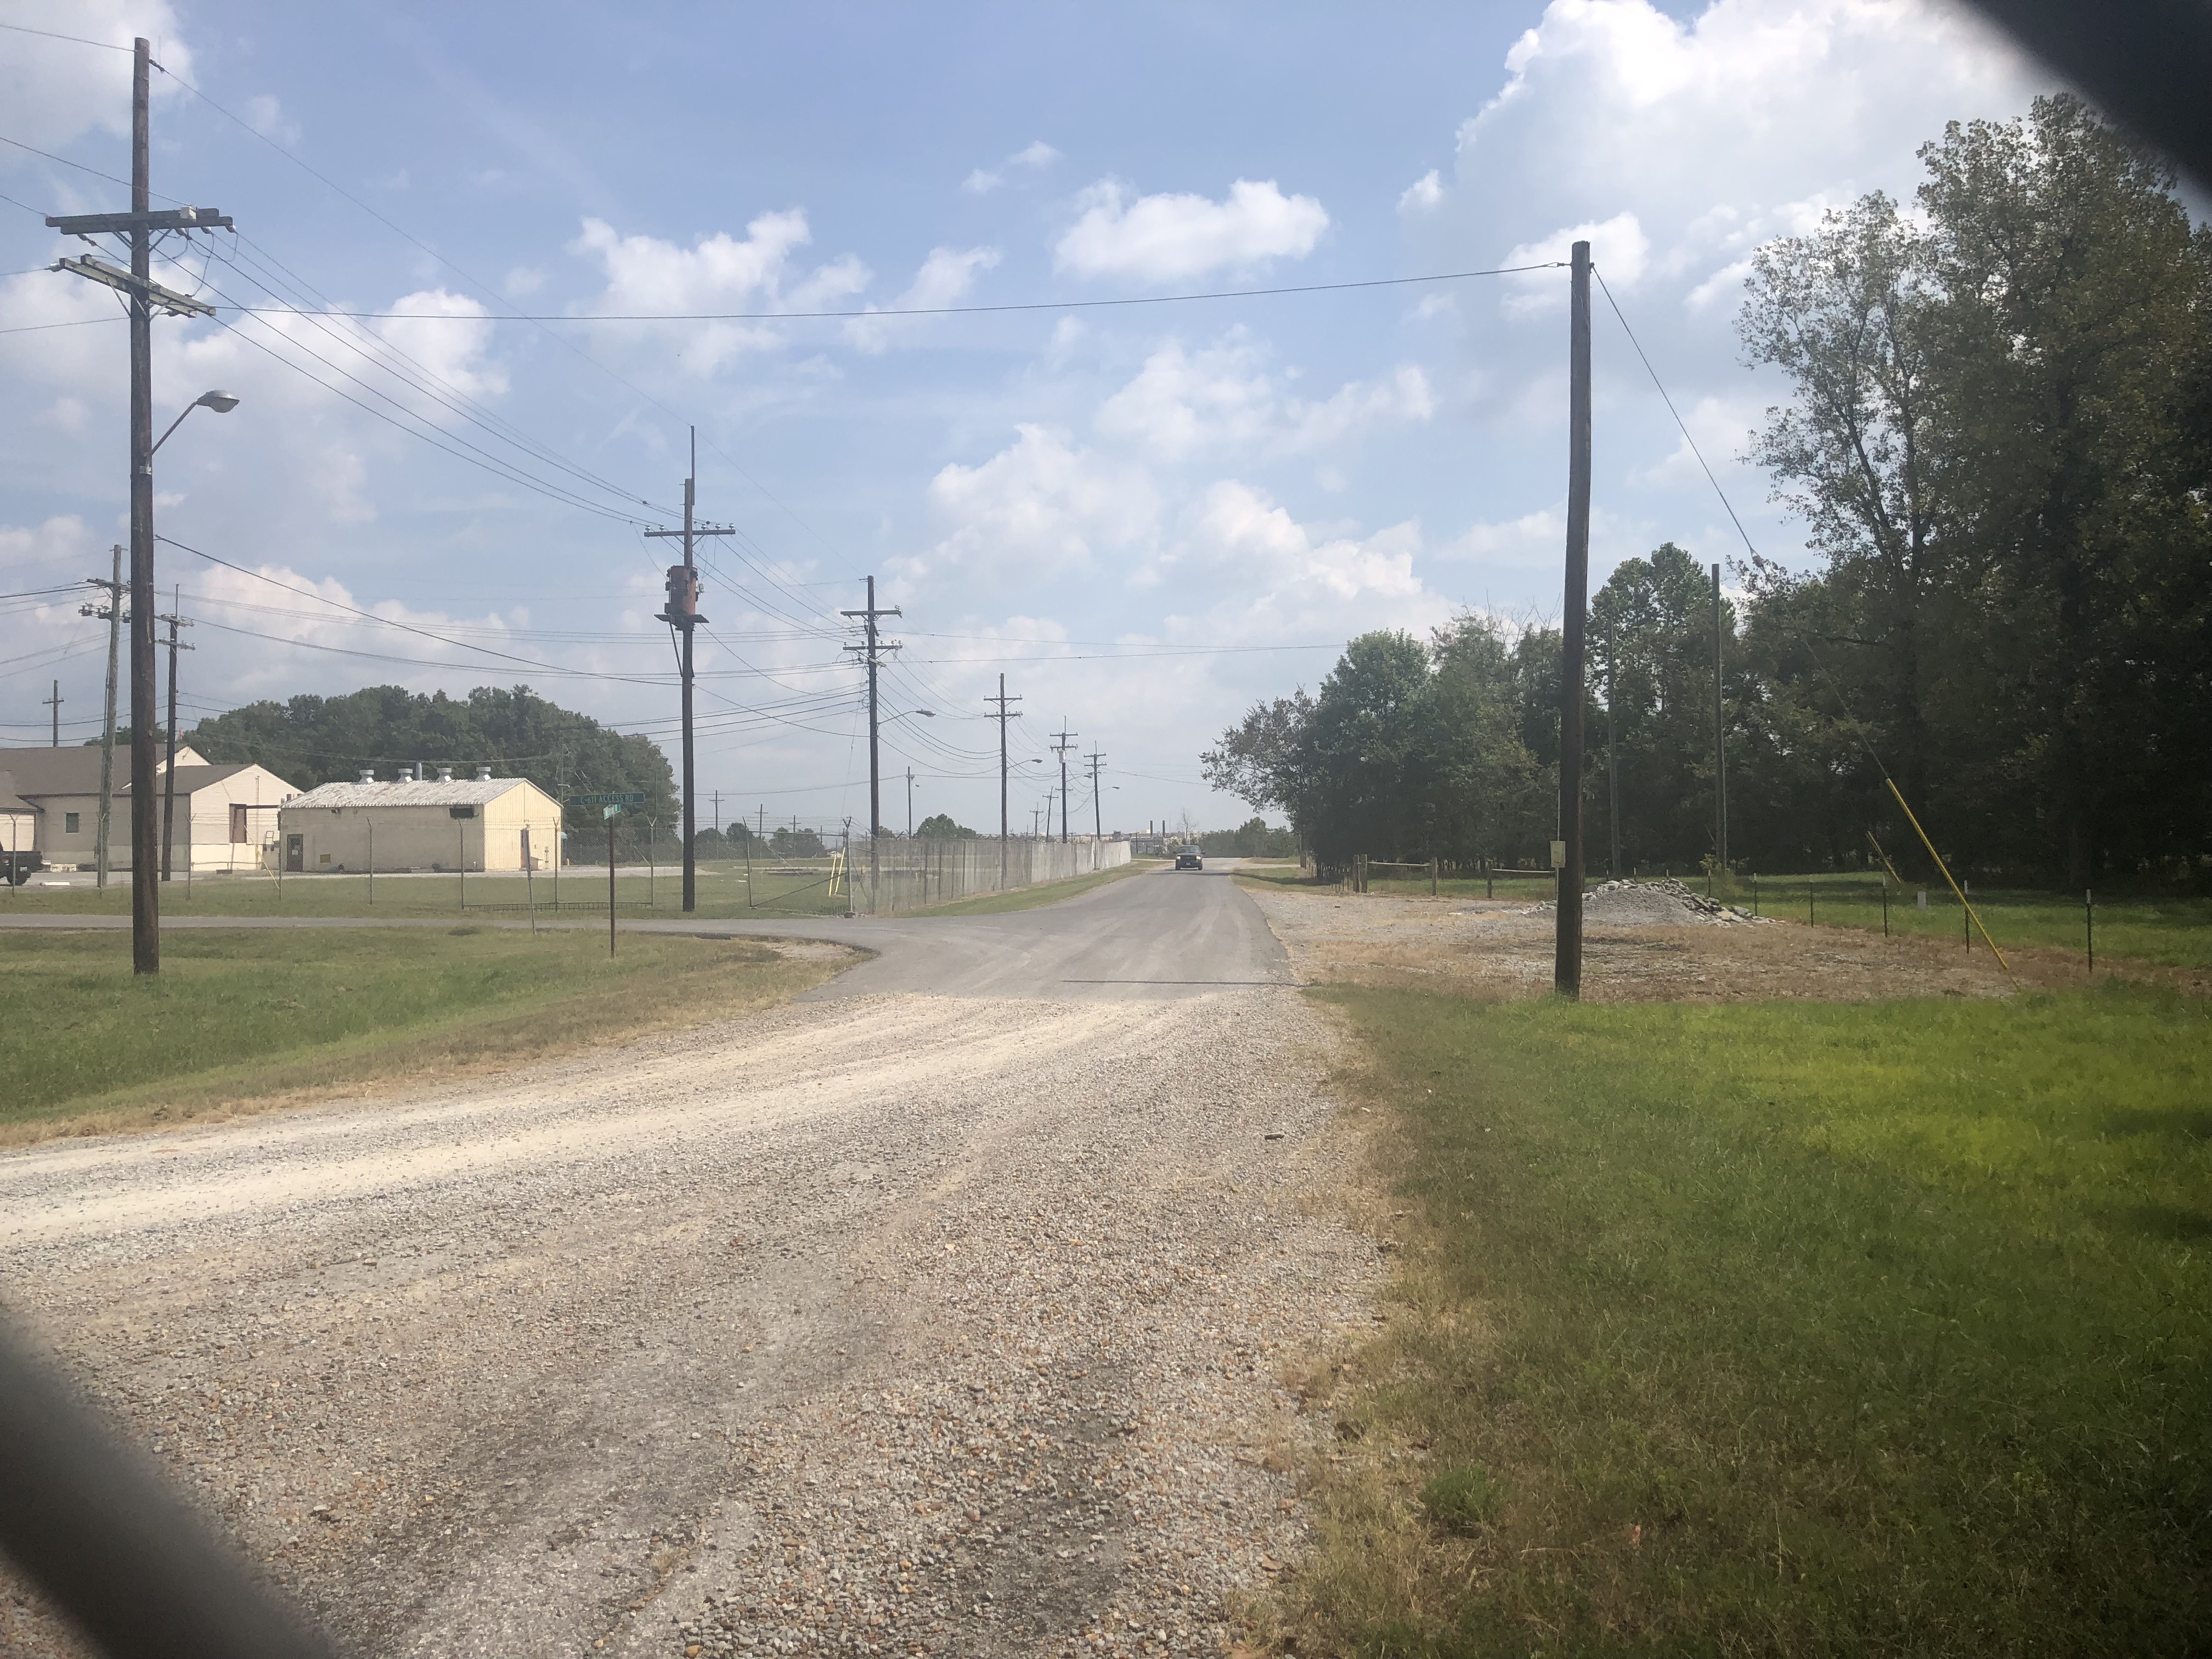 Water treatment facilities in the distance, as seen from inside a car on a gravel road in the West Kentucky Wildlife Management Area